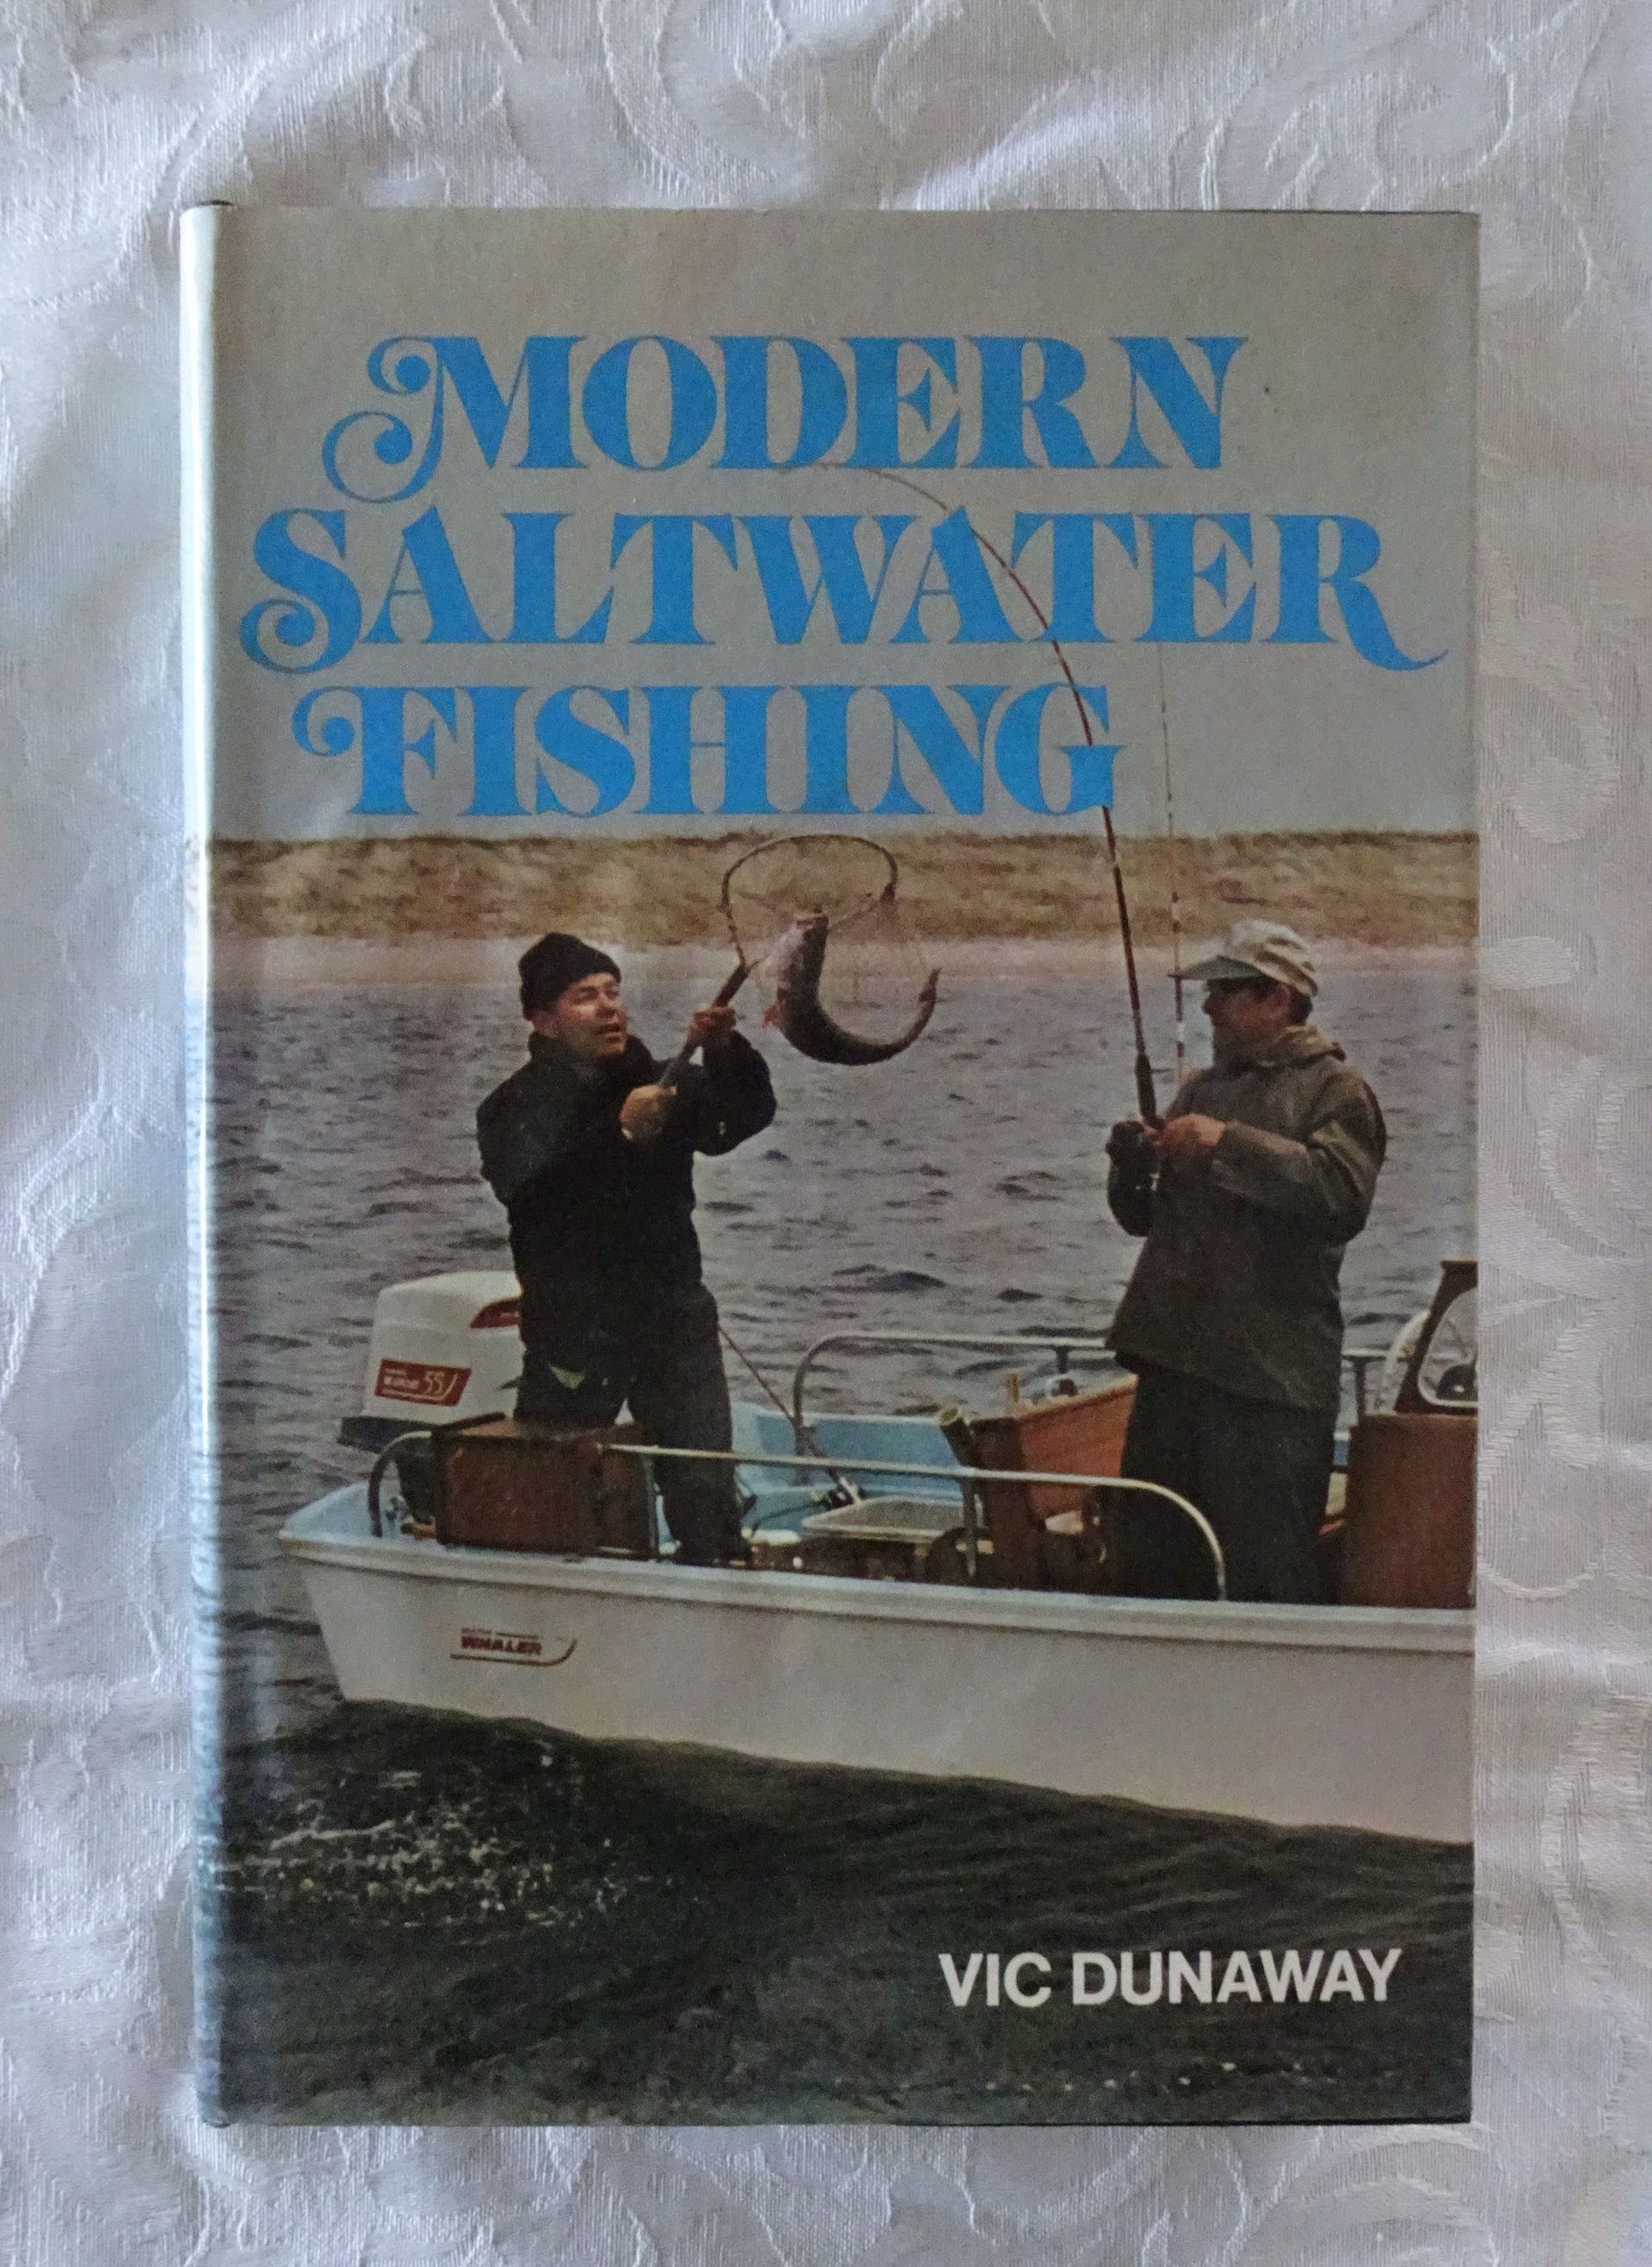 Sold at Auction: Modern Saltwater Fishing by Vic Dunaway VINTAGE 1975  Illustrated Hardcover Salt Water Fishing Reference 1st Edition 1st Printing  In DJ